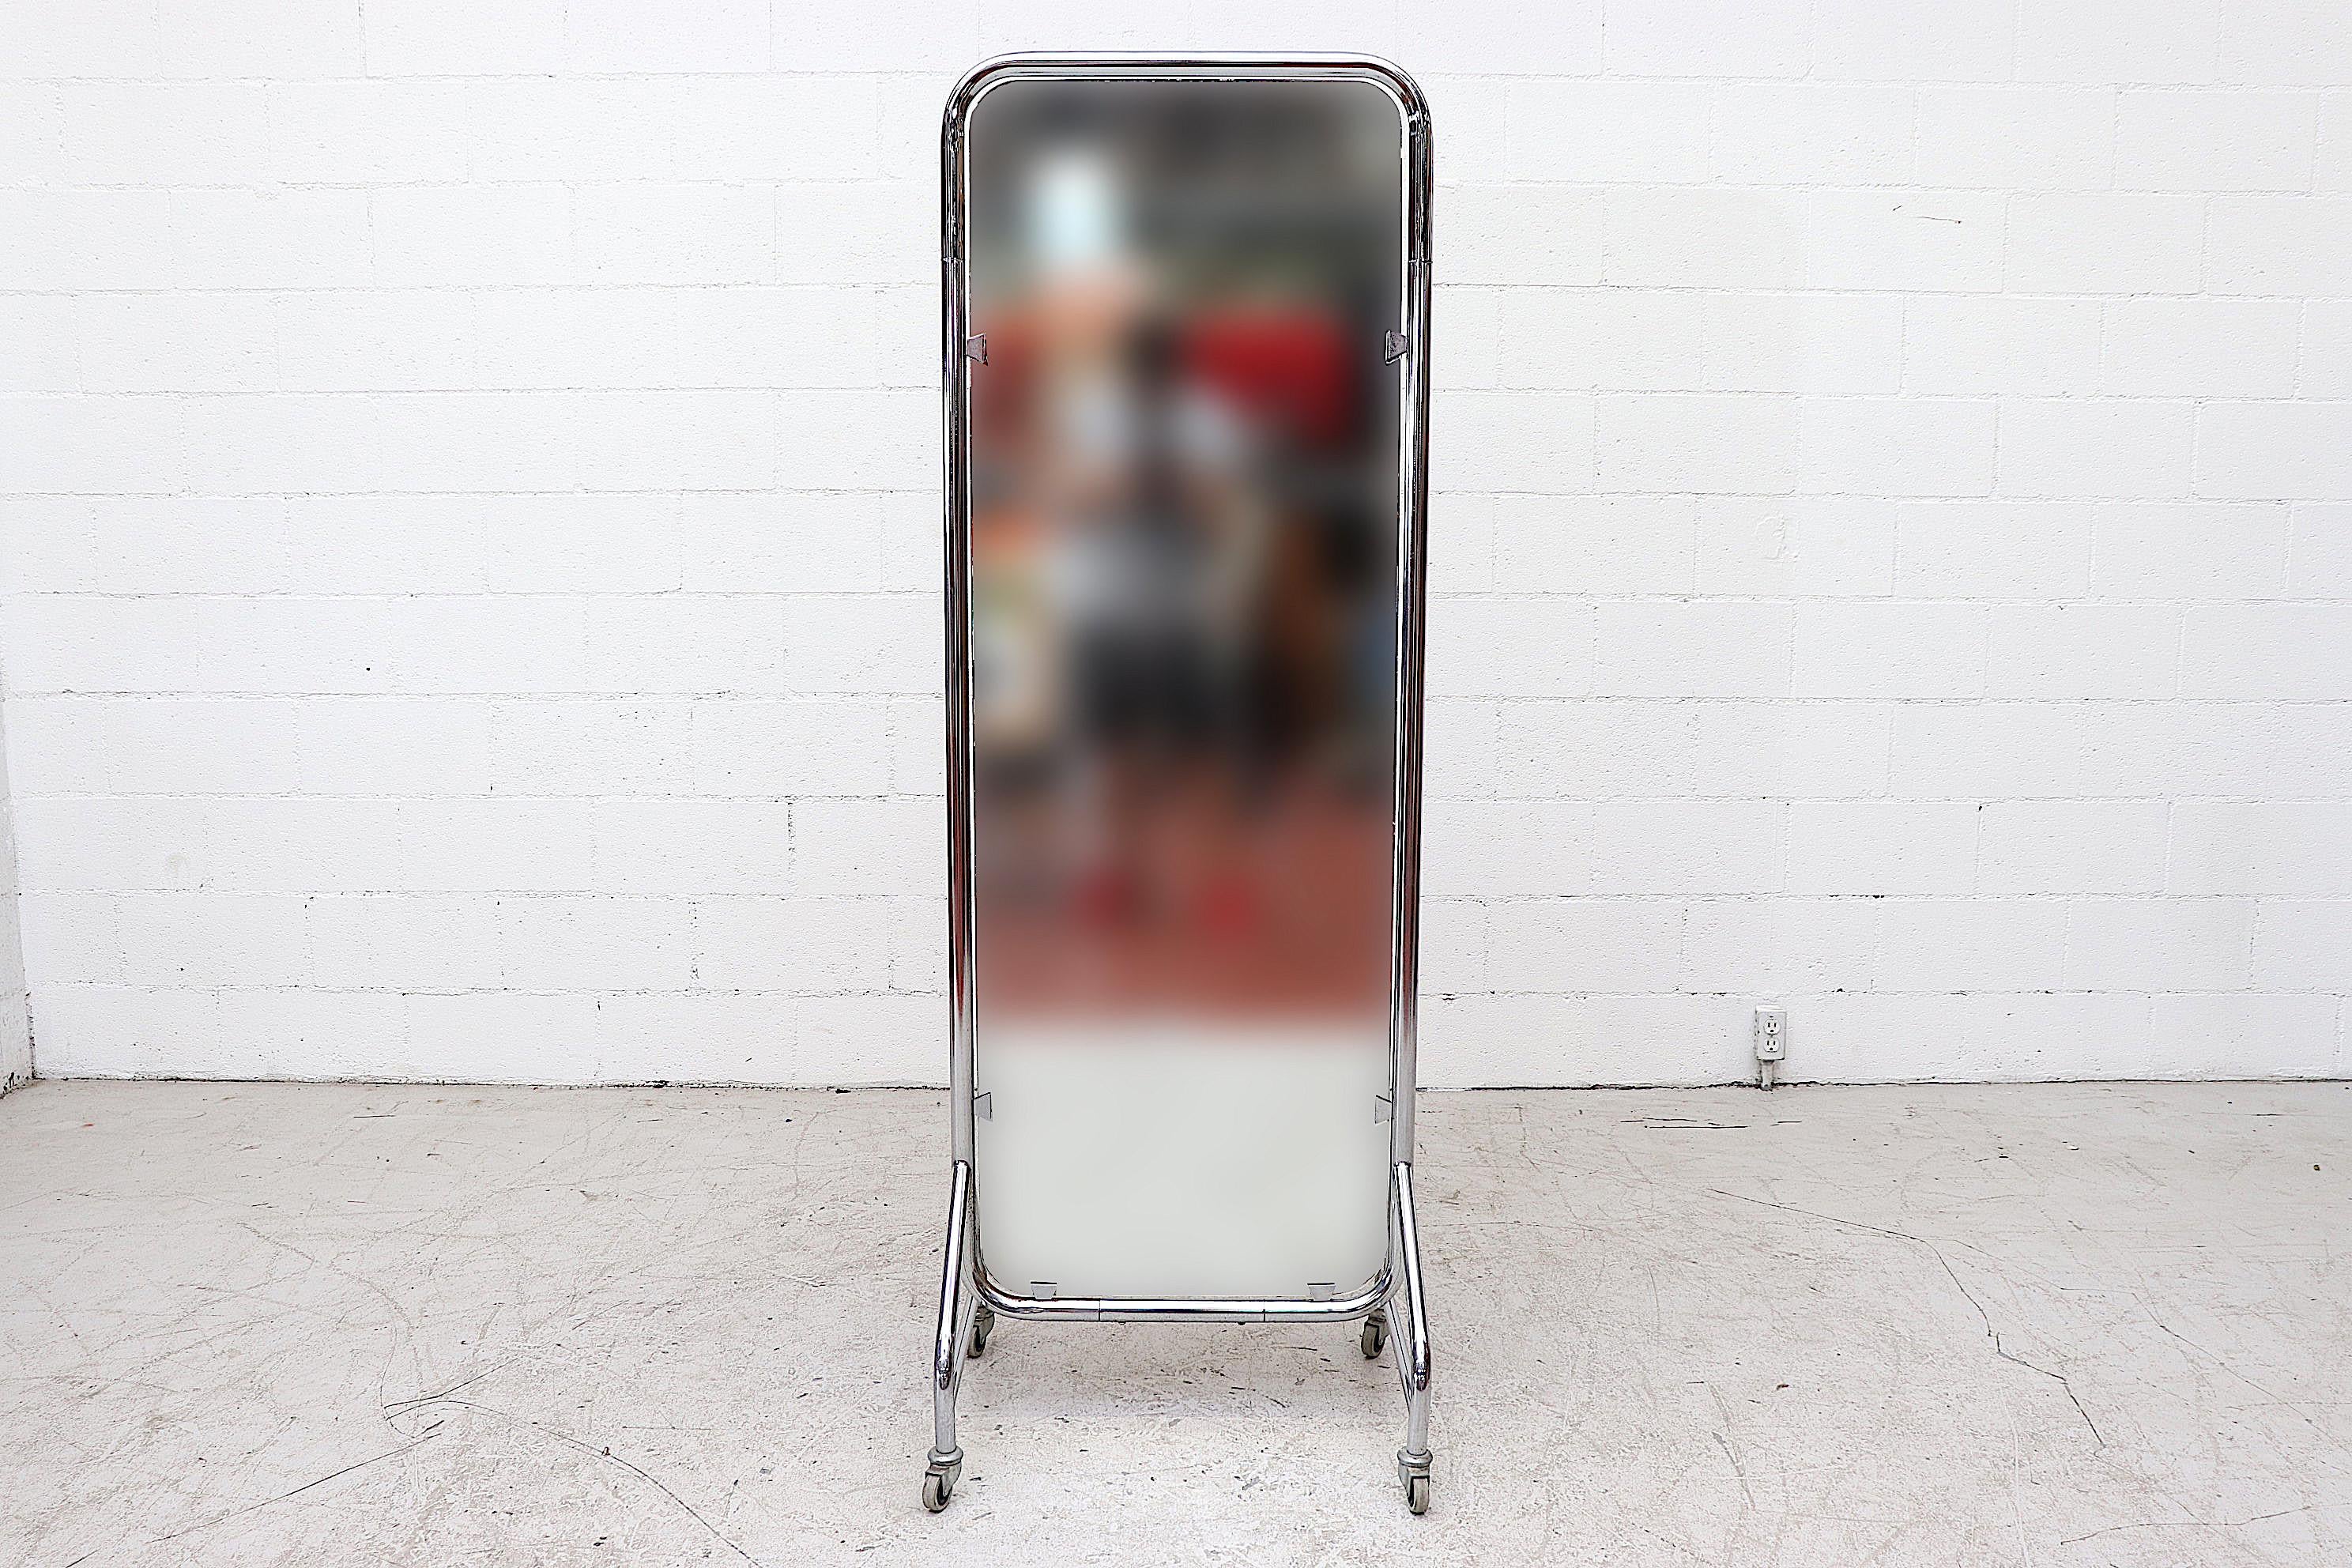 Rare midcentury Gispen full length rolling hospital mirror with chrome frame. In original condition with visible wear consistent with its age and usage.